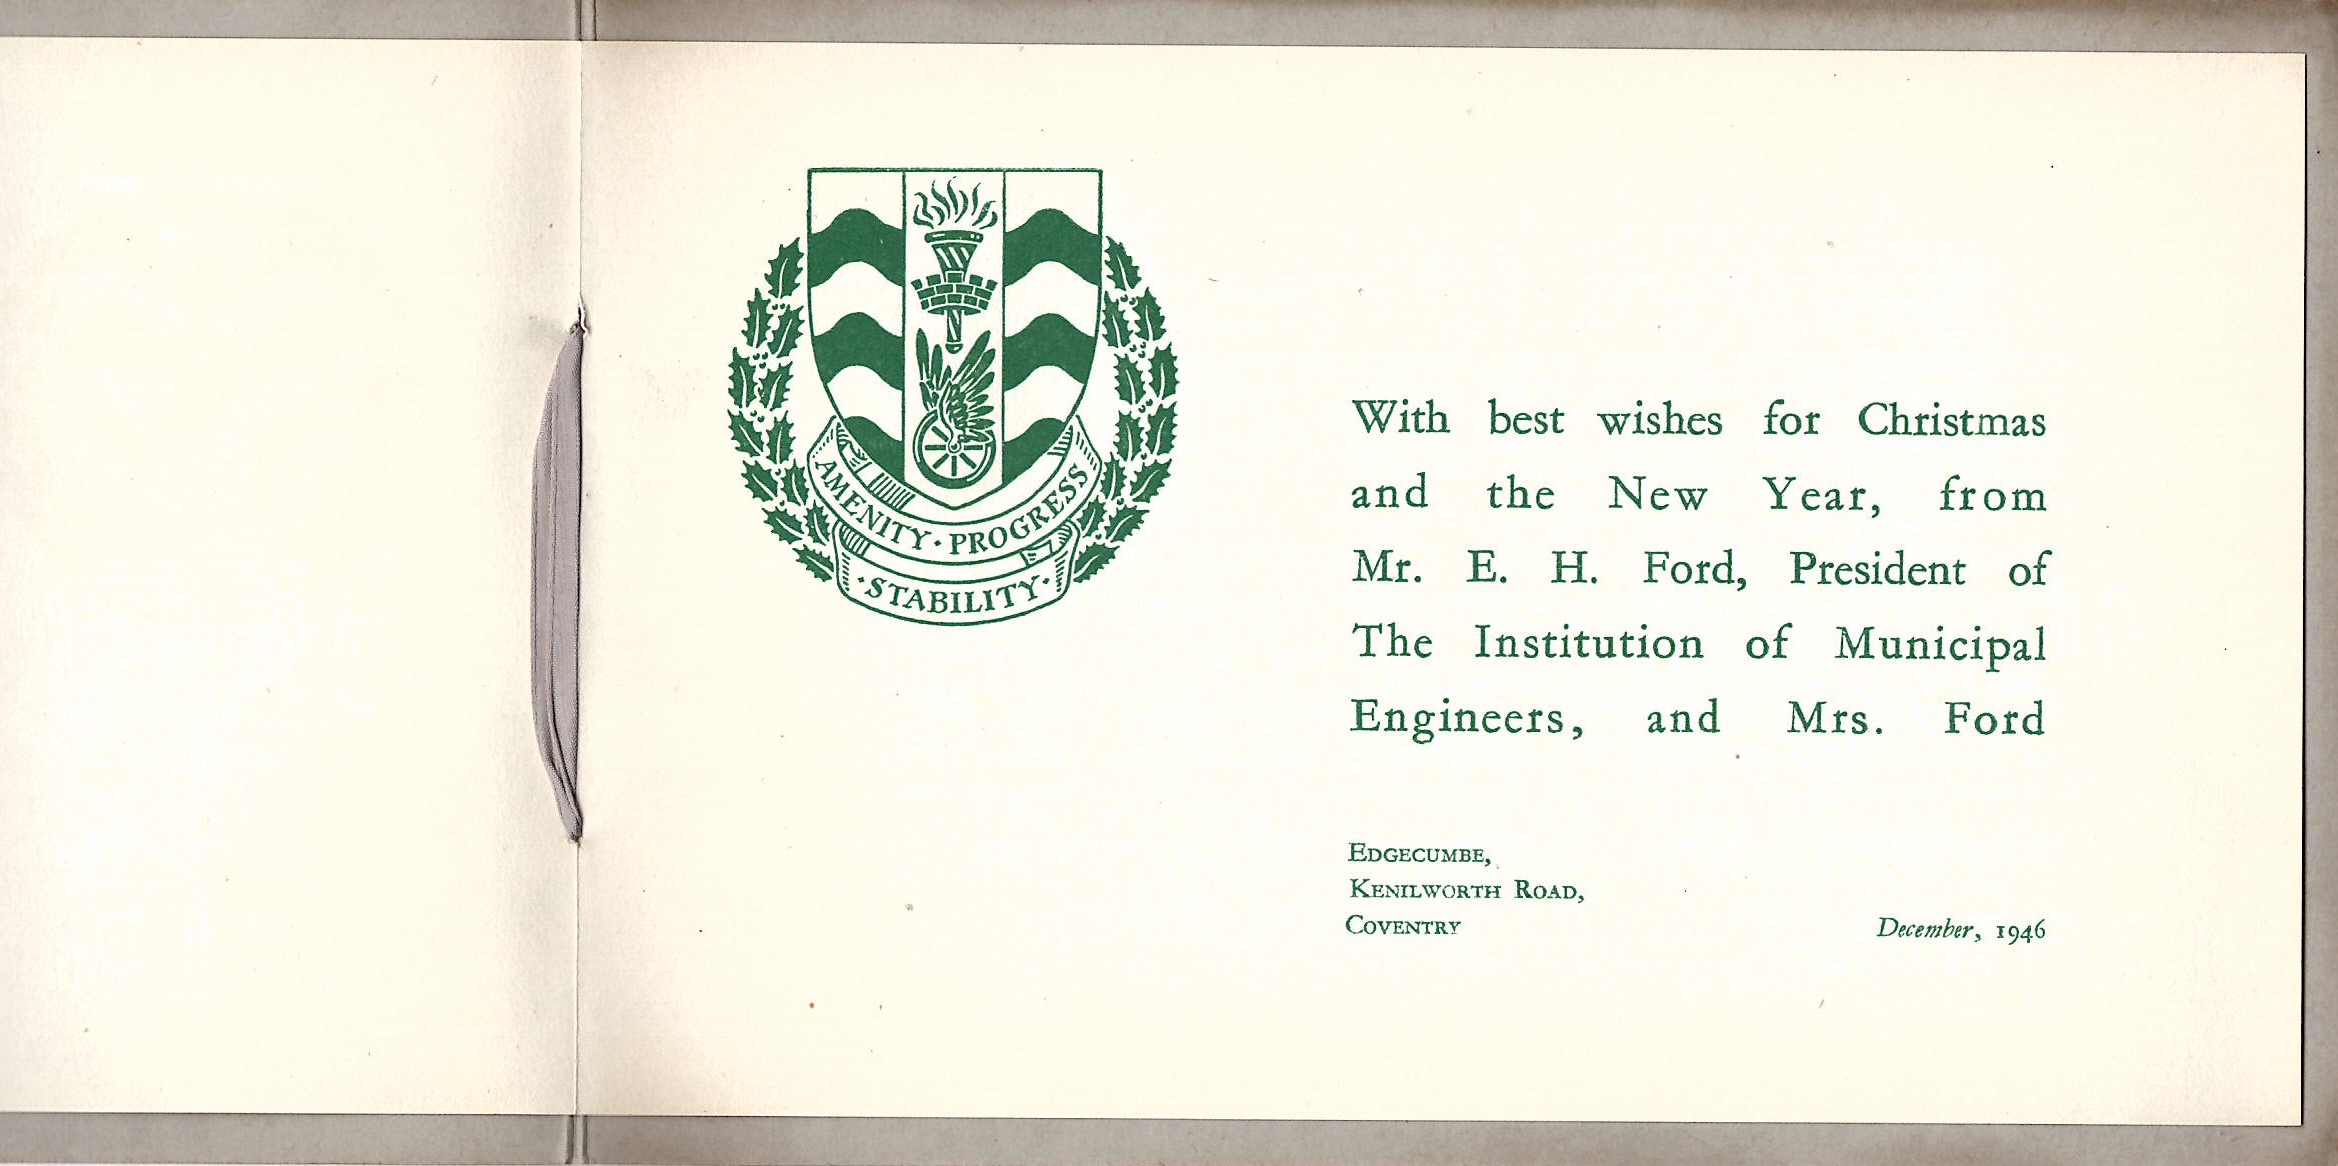 Inside of the second card referenced in the text, with a coat of arms and text reading, "With best wishes for Christmas and the New Year, from Mr E. H. Ford, President of The Institution of Municipal Engineers, and Mrs Ford, Edgecumbe, Kenilworth Road, Coventry, December 1946"